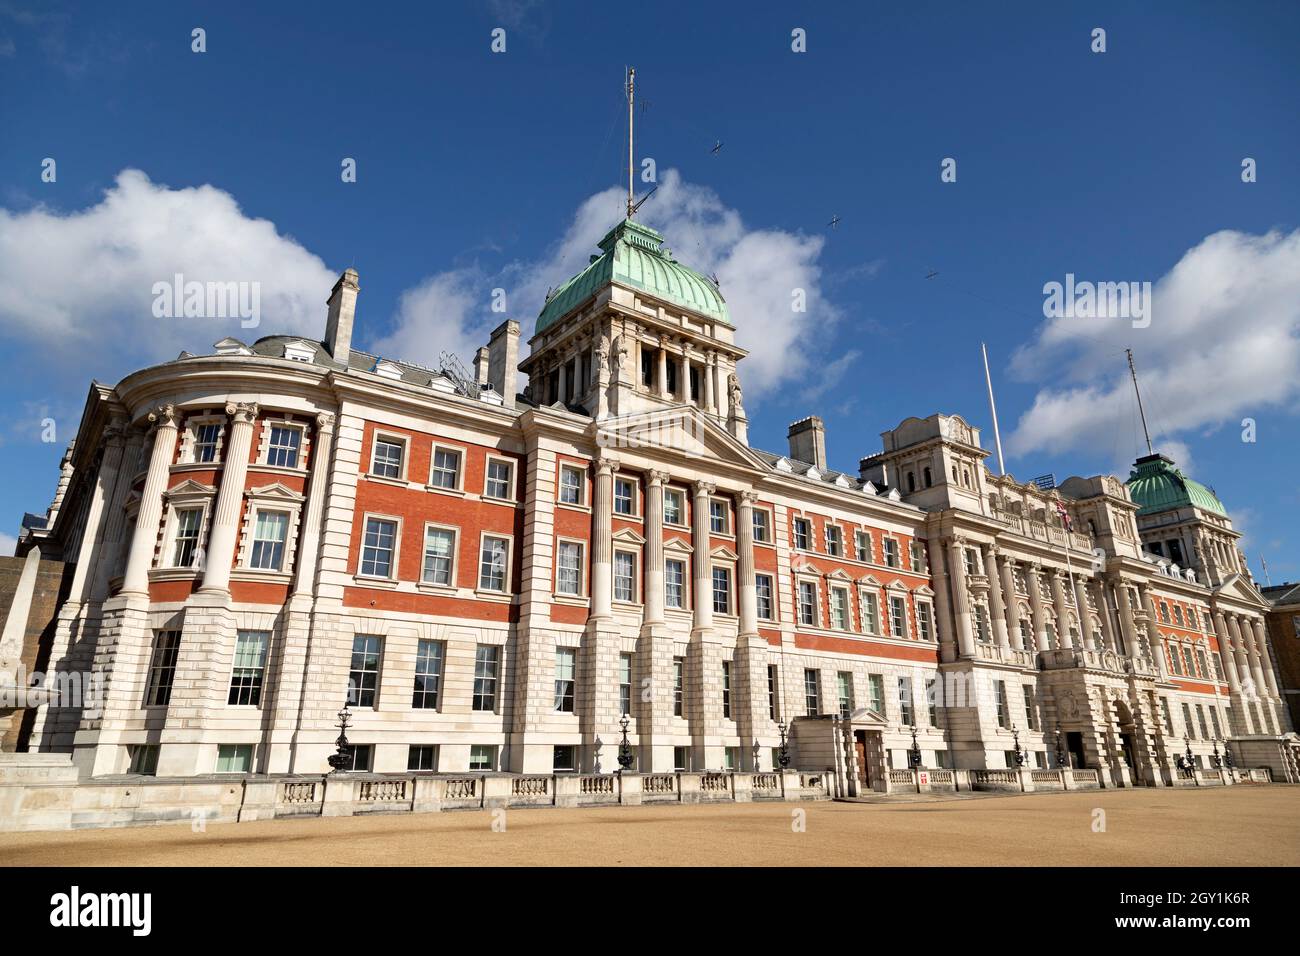 Admiralty House at Whitehall in London, England. Stock Photo